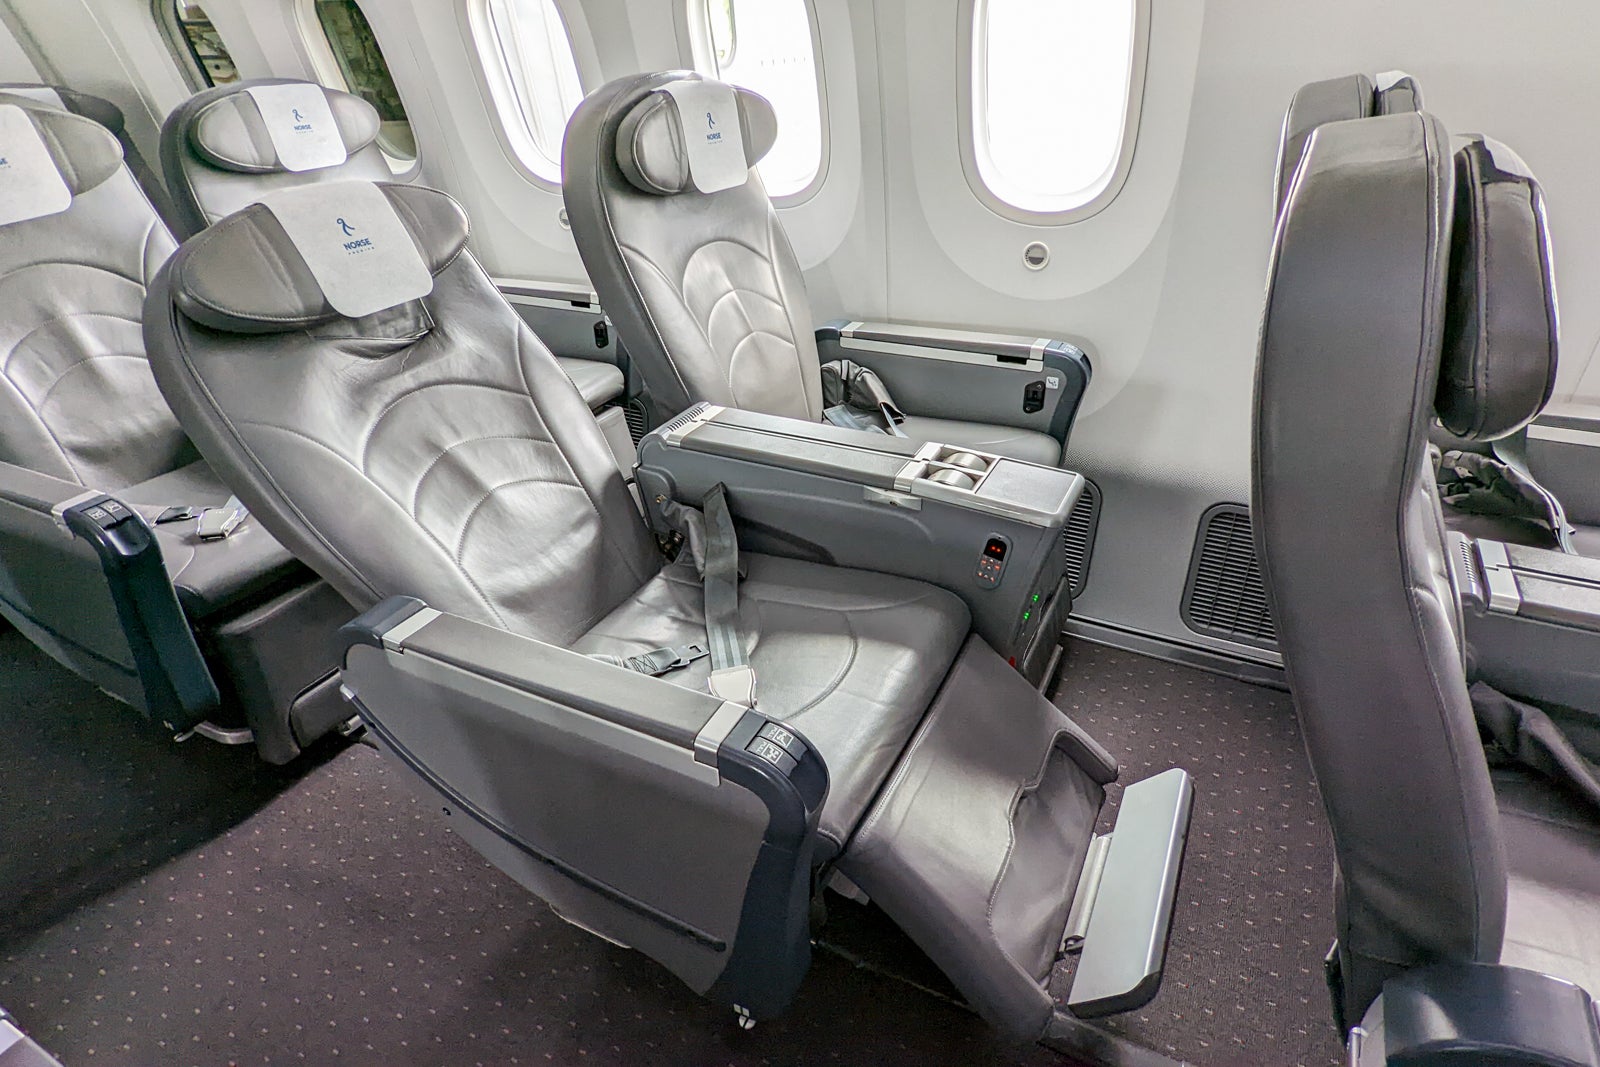 A review of Norse Atlantic Premium on the 787 from London to New York ...